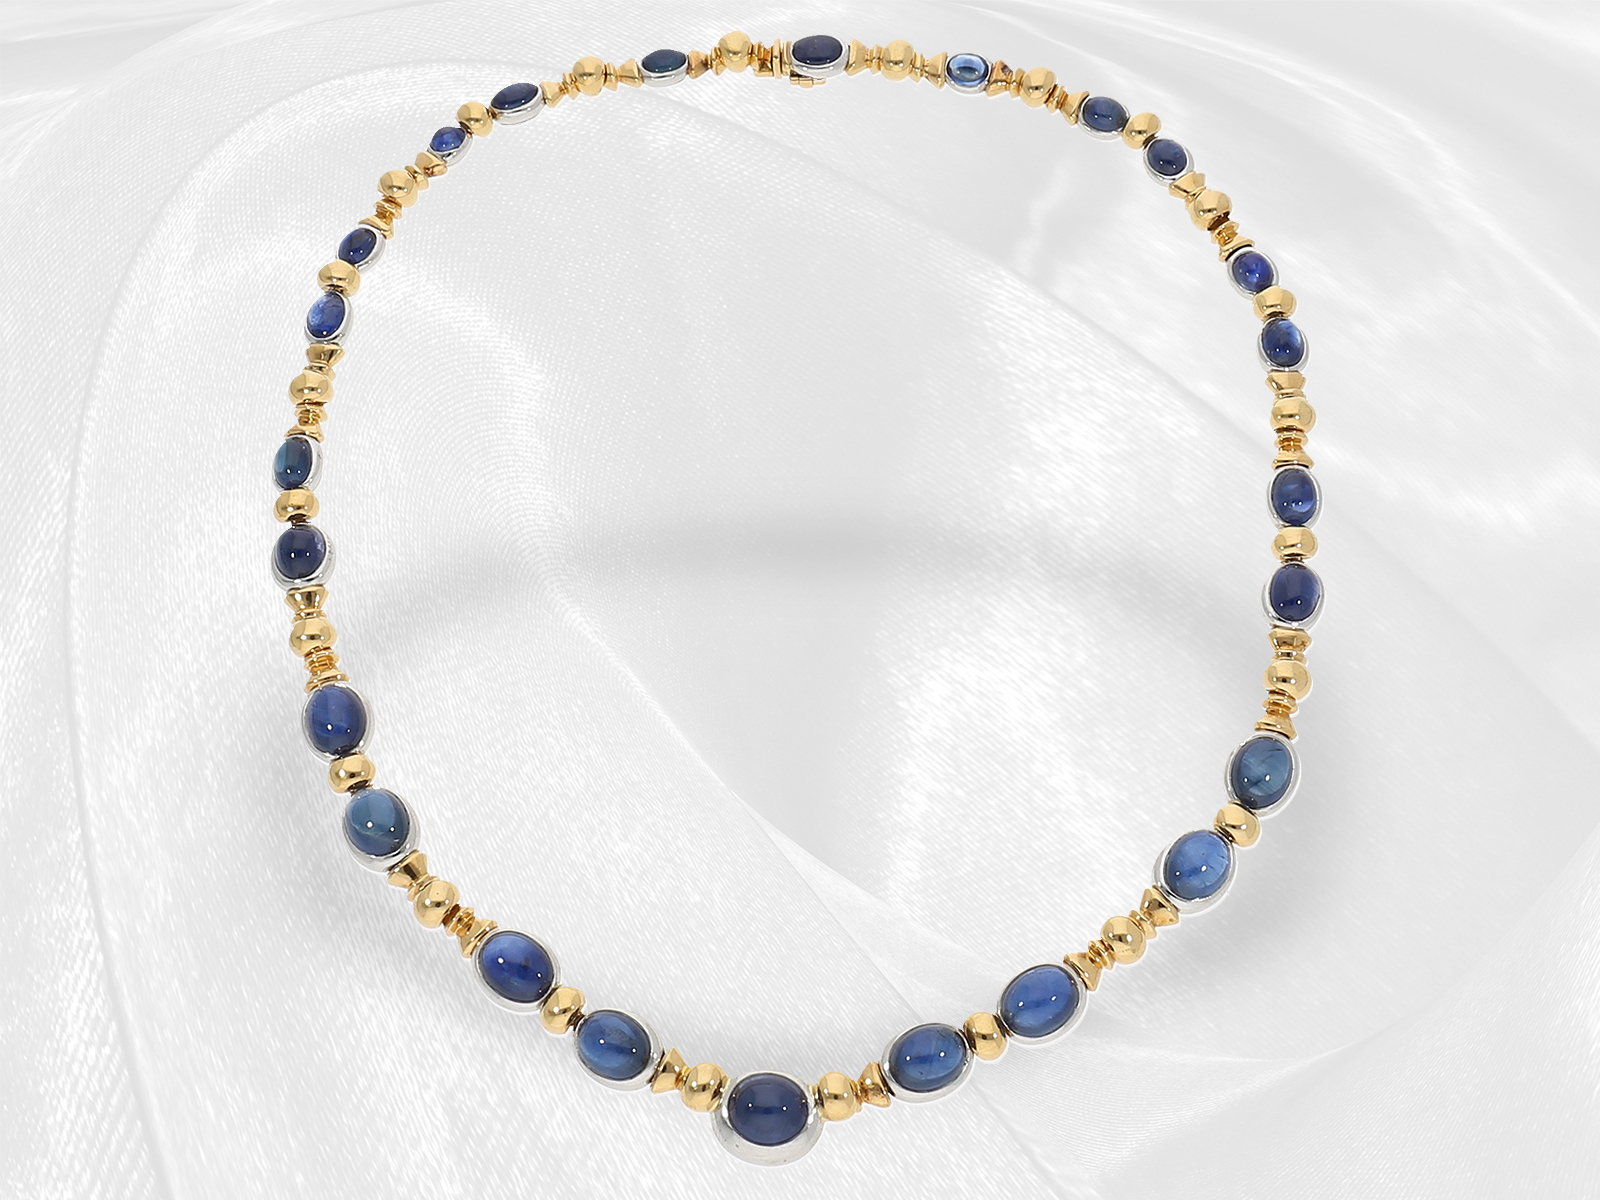 Luxurious 3-piece sapphire jewellery set from the house of "Tabbah", highest quality handcrafted fro - Image 4 of 7